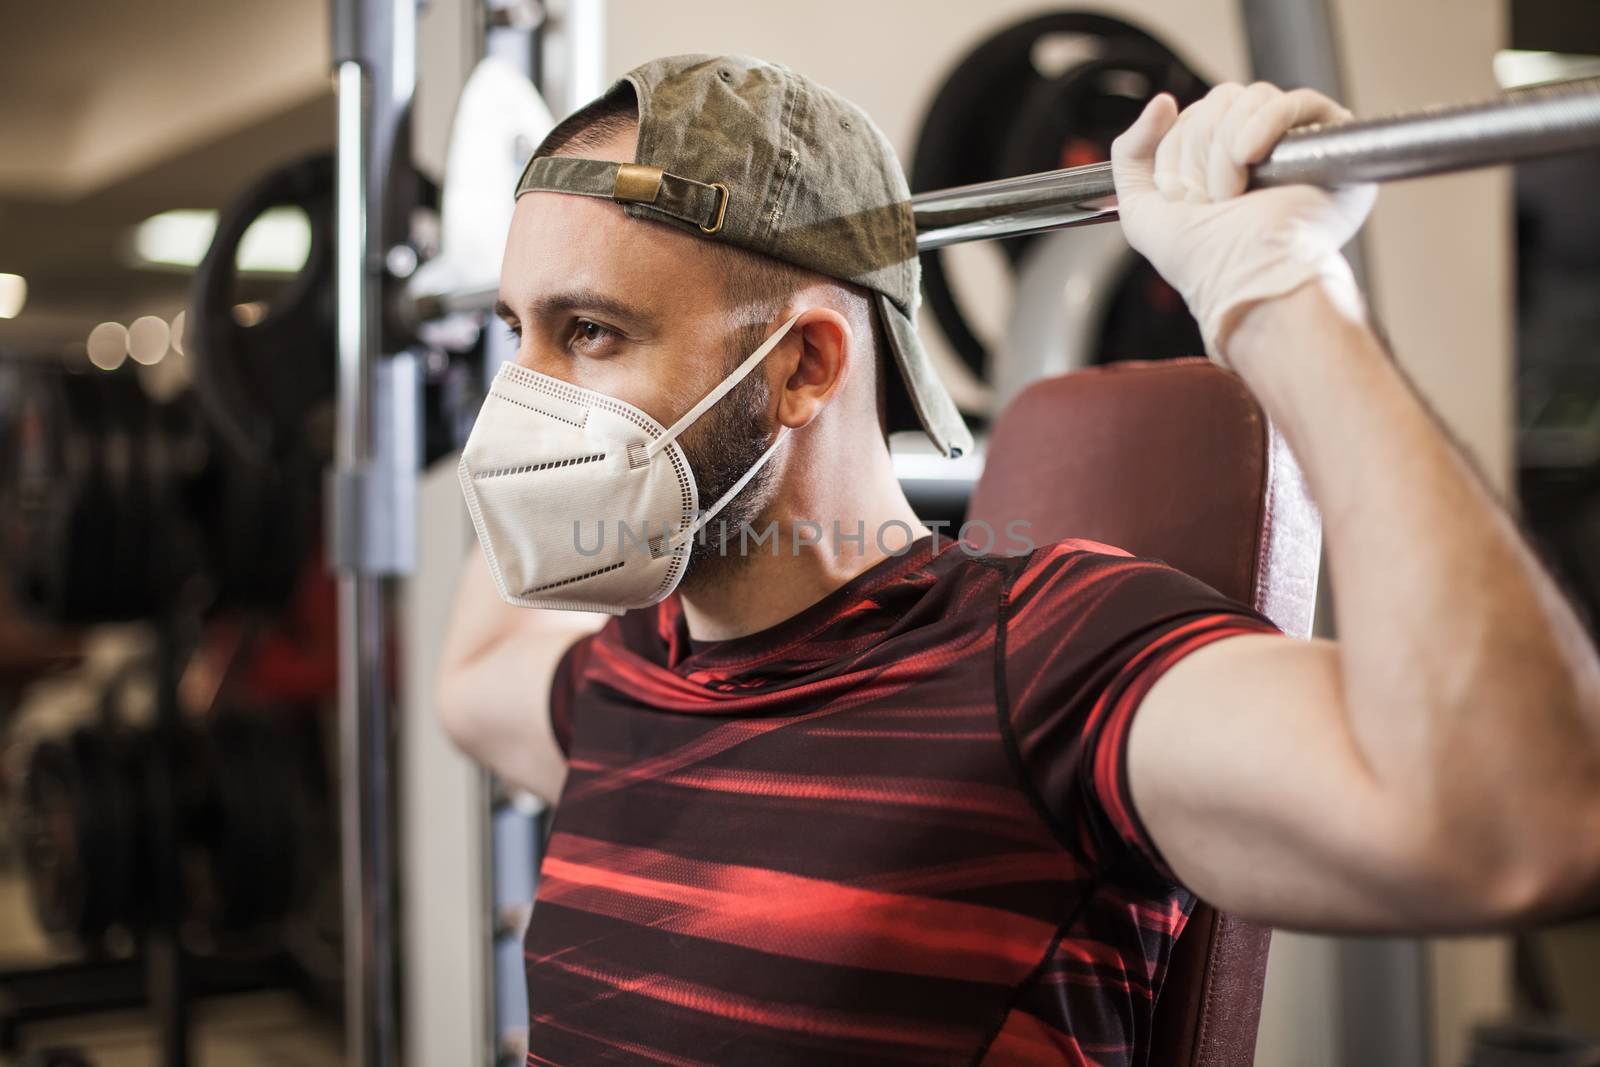 Young caucasian man lifting weights in US gym wearing protective rubber latex gloves & face mask,COVID-19 pandemic outbreak enforcing social distancing rule,prevention of Coronavirus spread & transfer